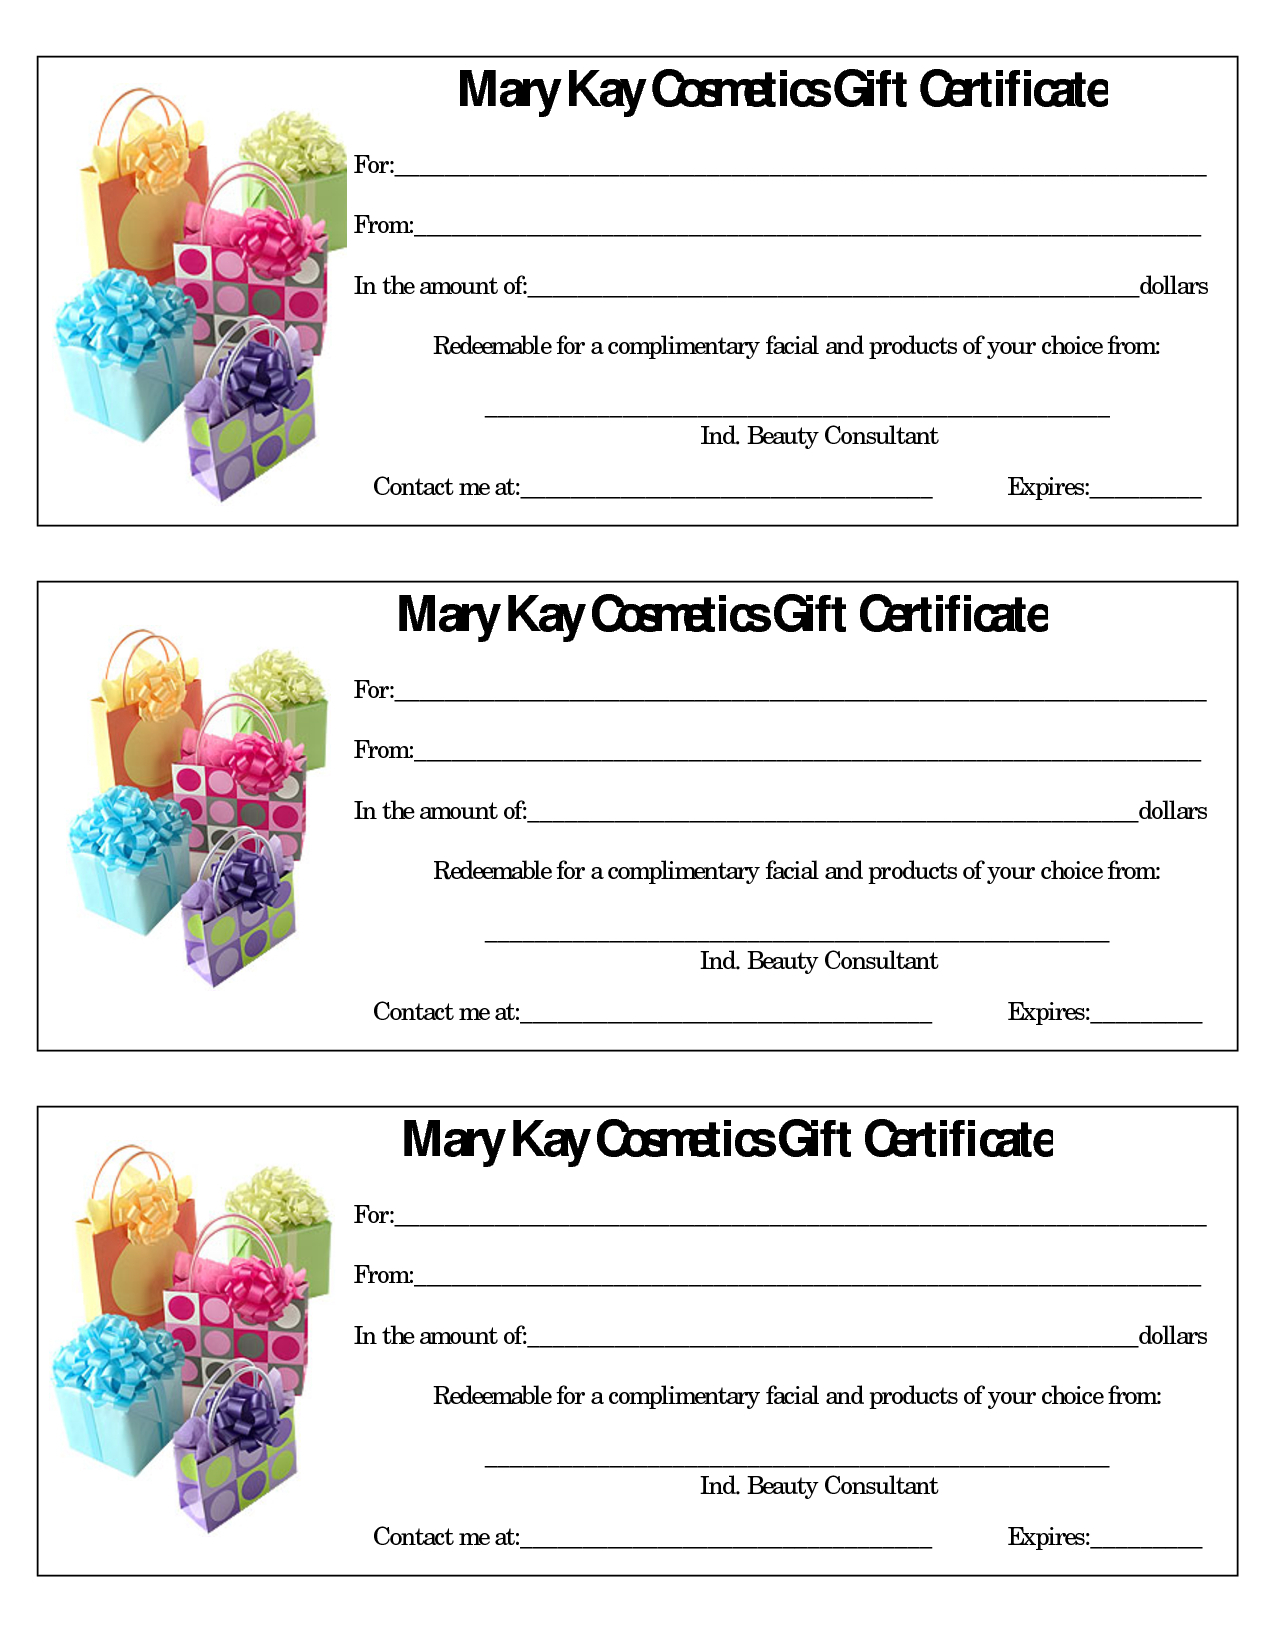 Mary Kay Gift Certificate Template Free Download Throughout Mary Kay Gift Certificate Template